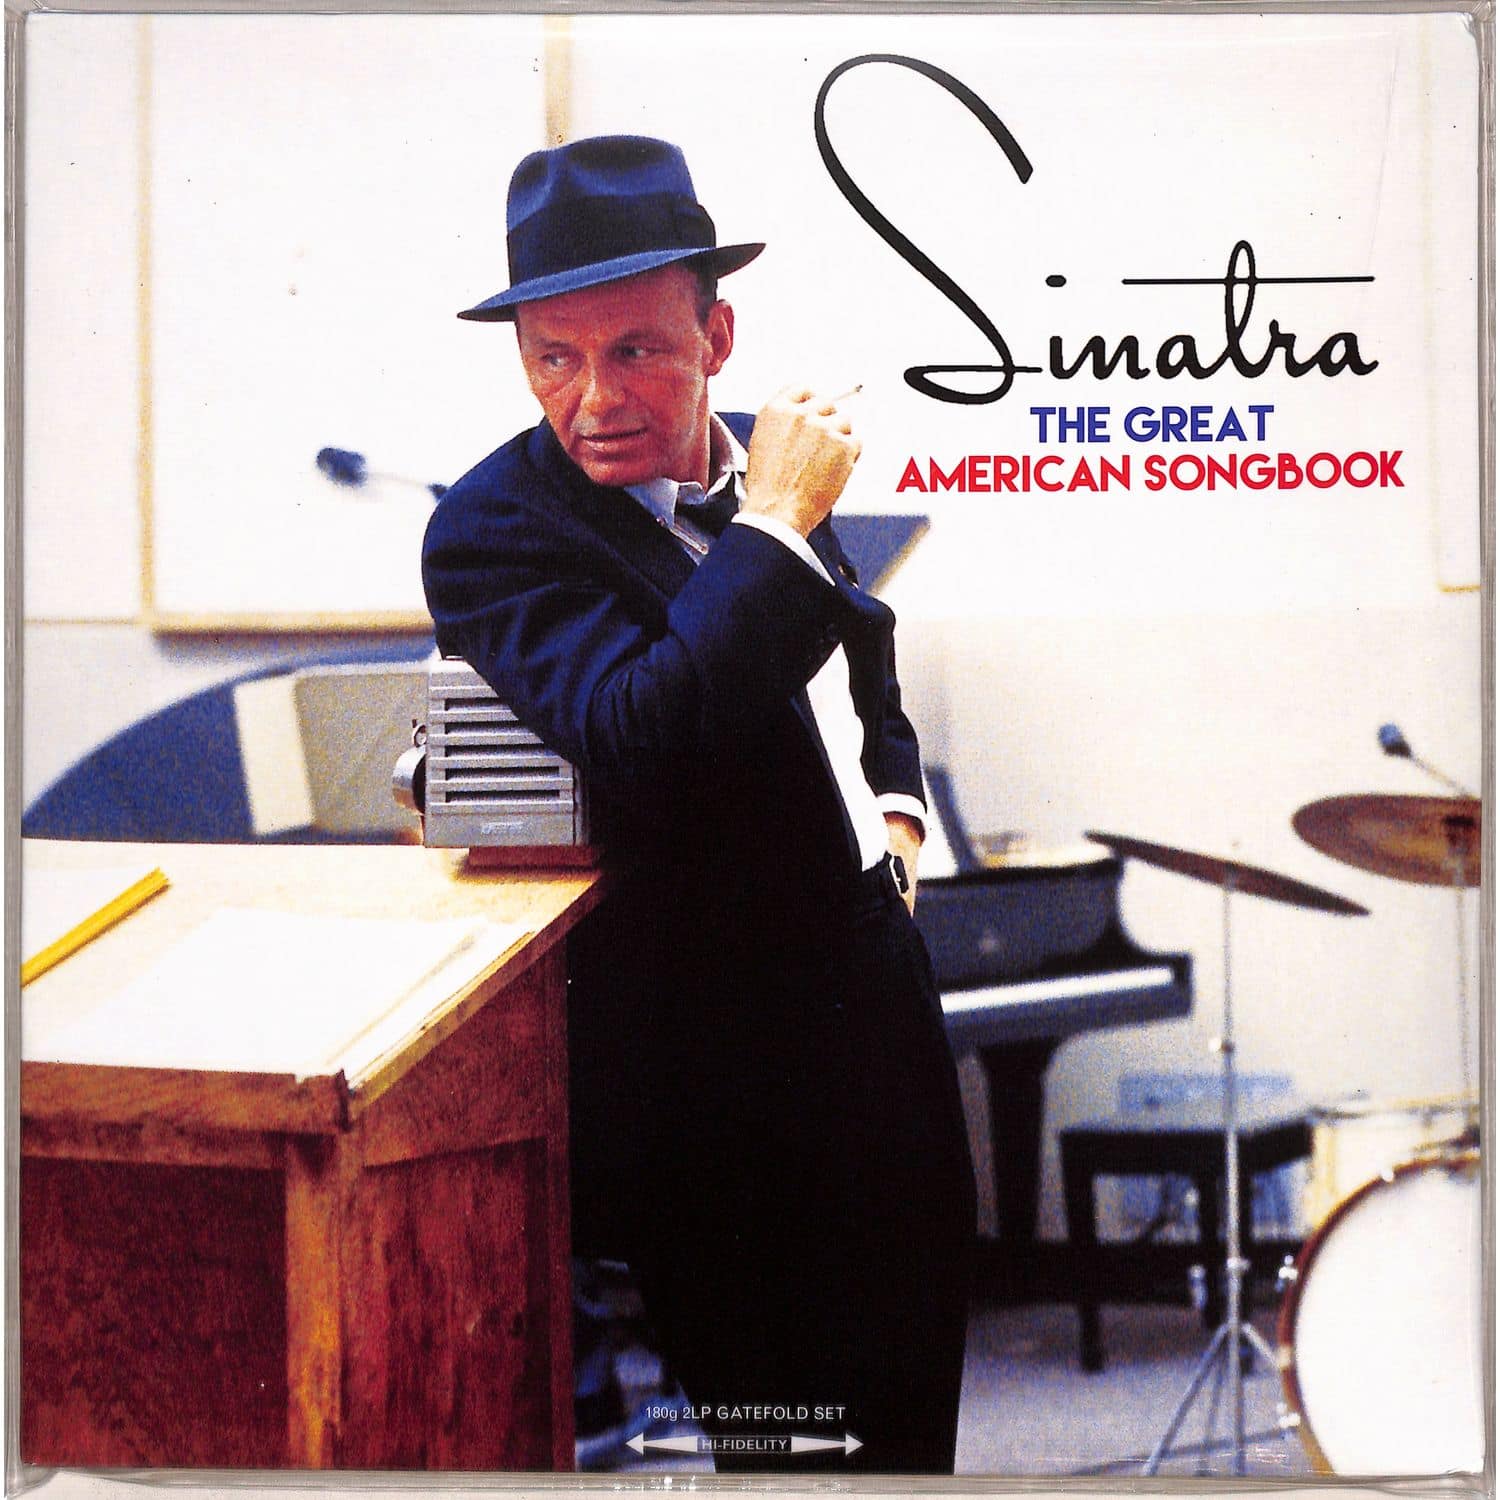 Sinatra - THE GREAT AMERICAN SONGBOOK 